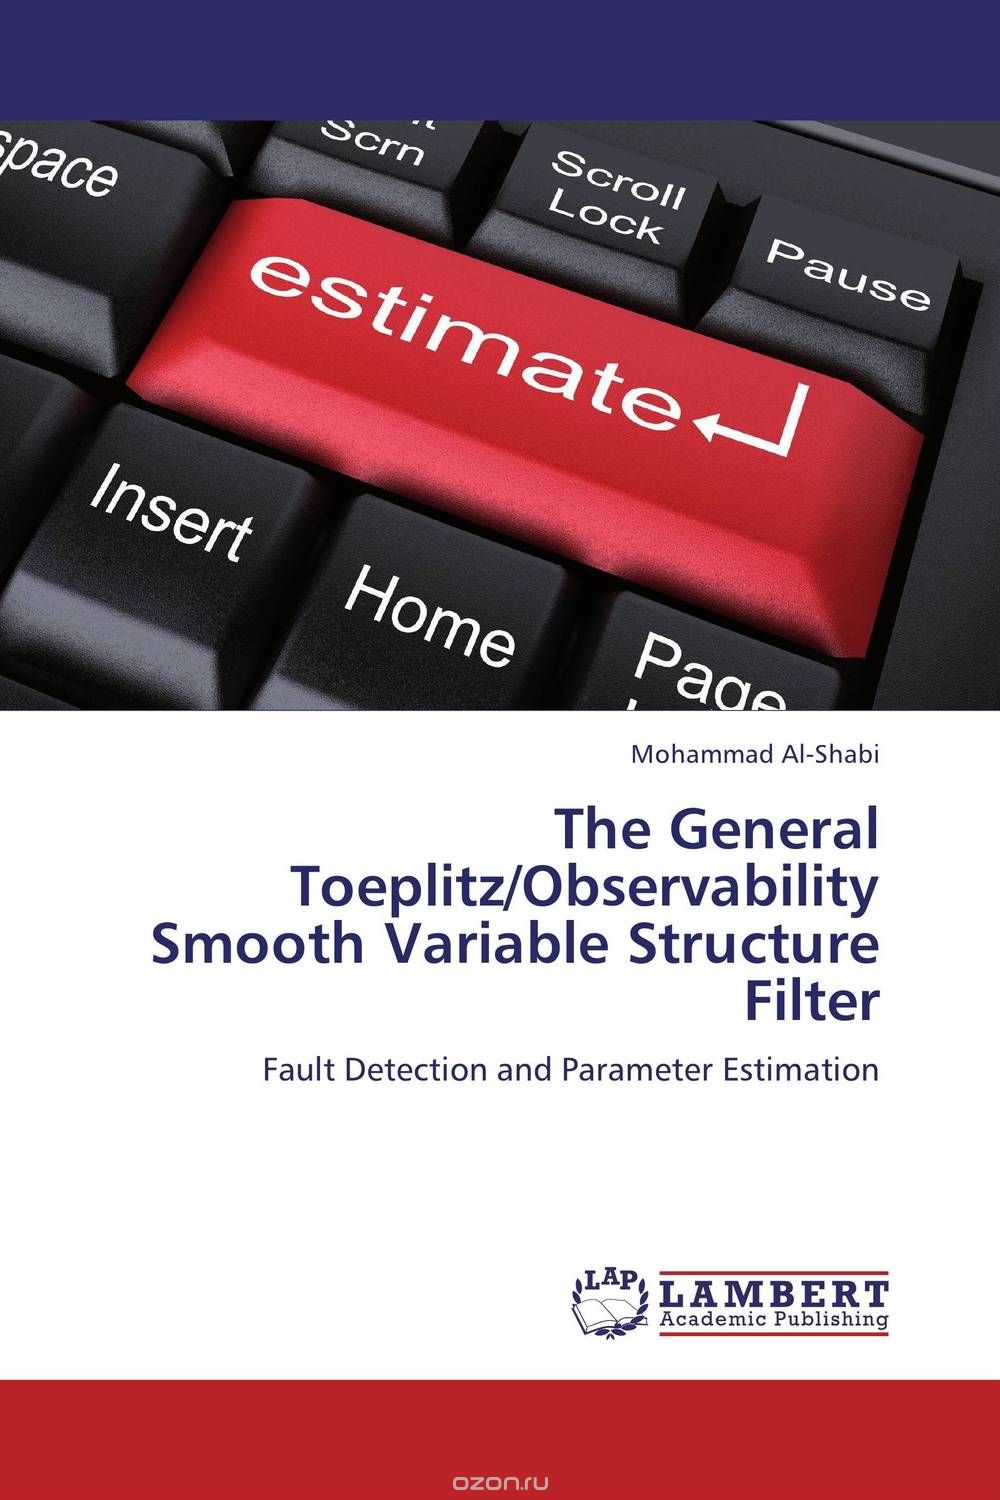 Скачать книгу "The General Toeplitz/Observability Smooth Variable Structure Filter"